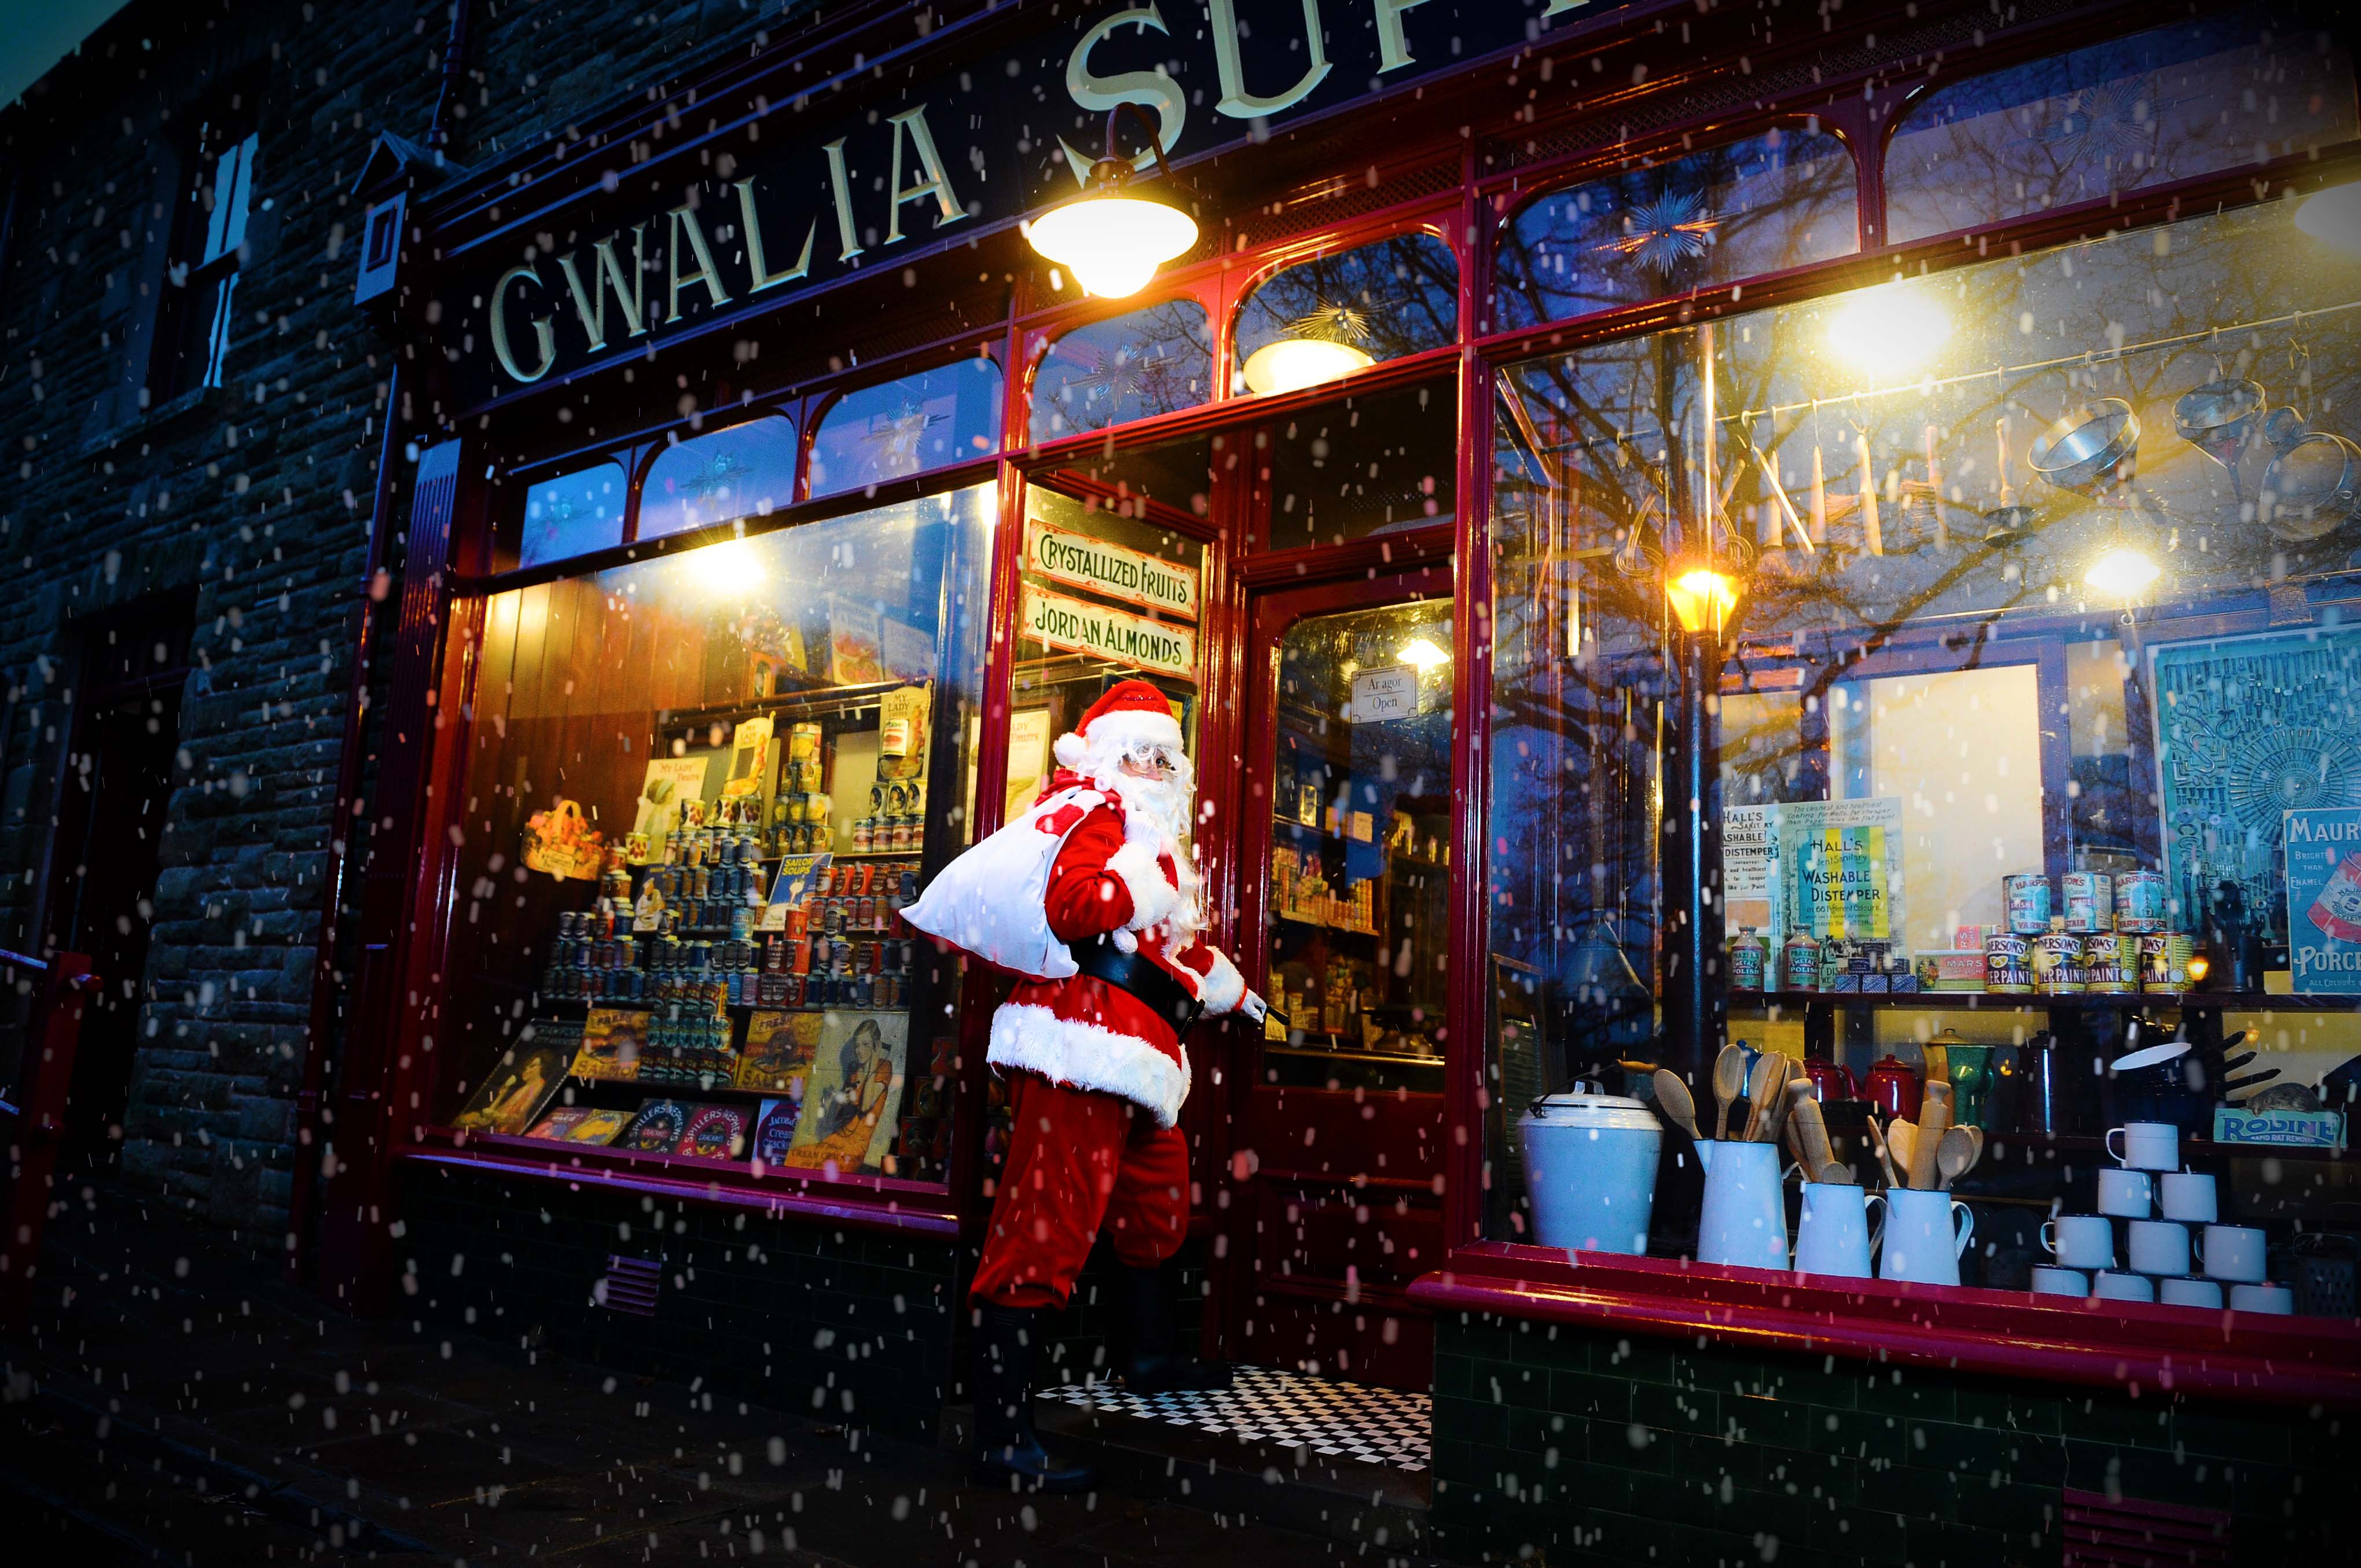 Father Christmas stands in a shop doorway while snow falls.